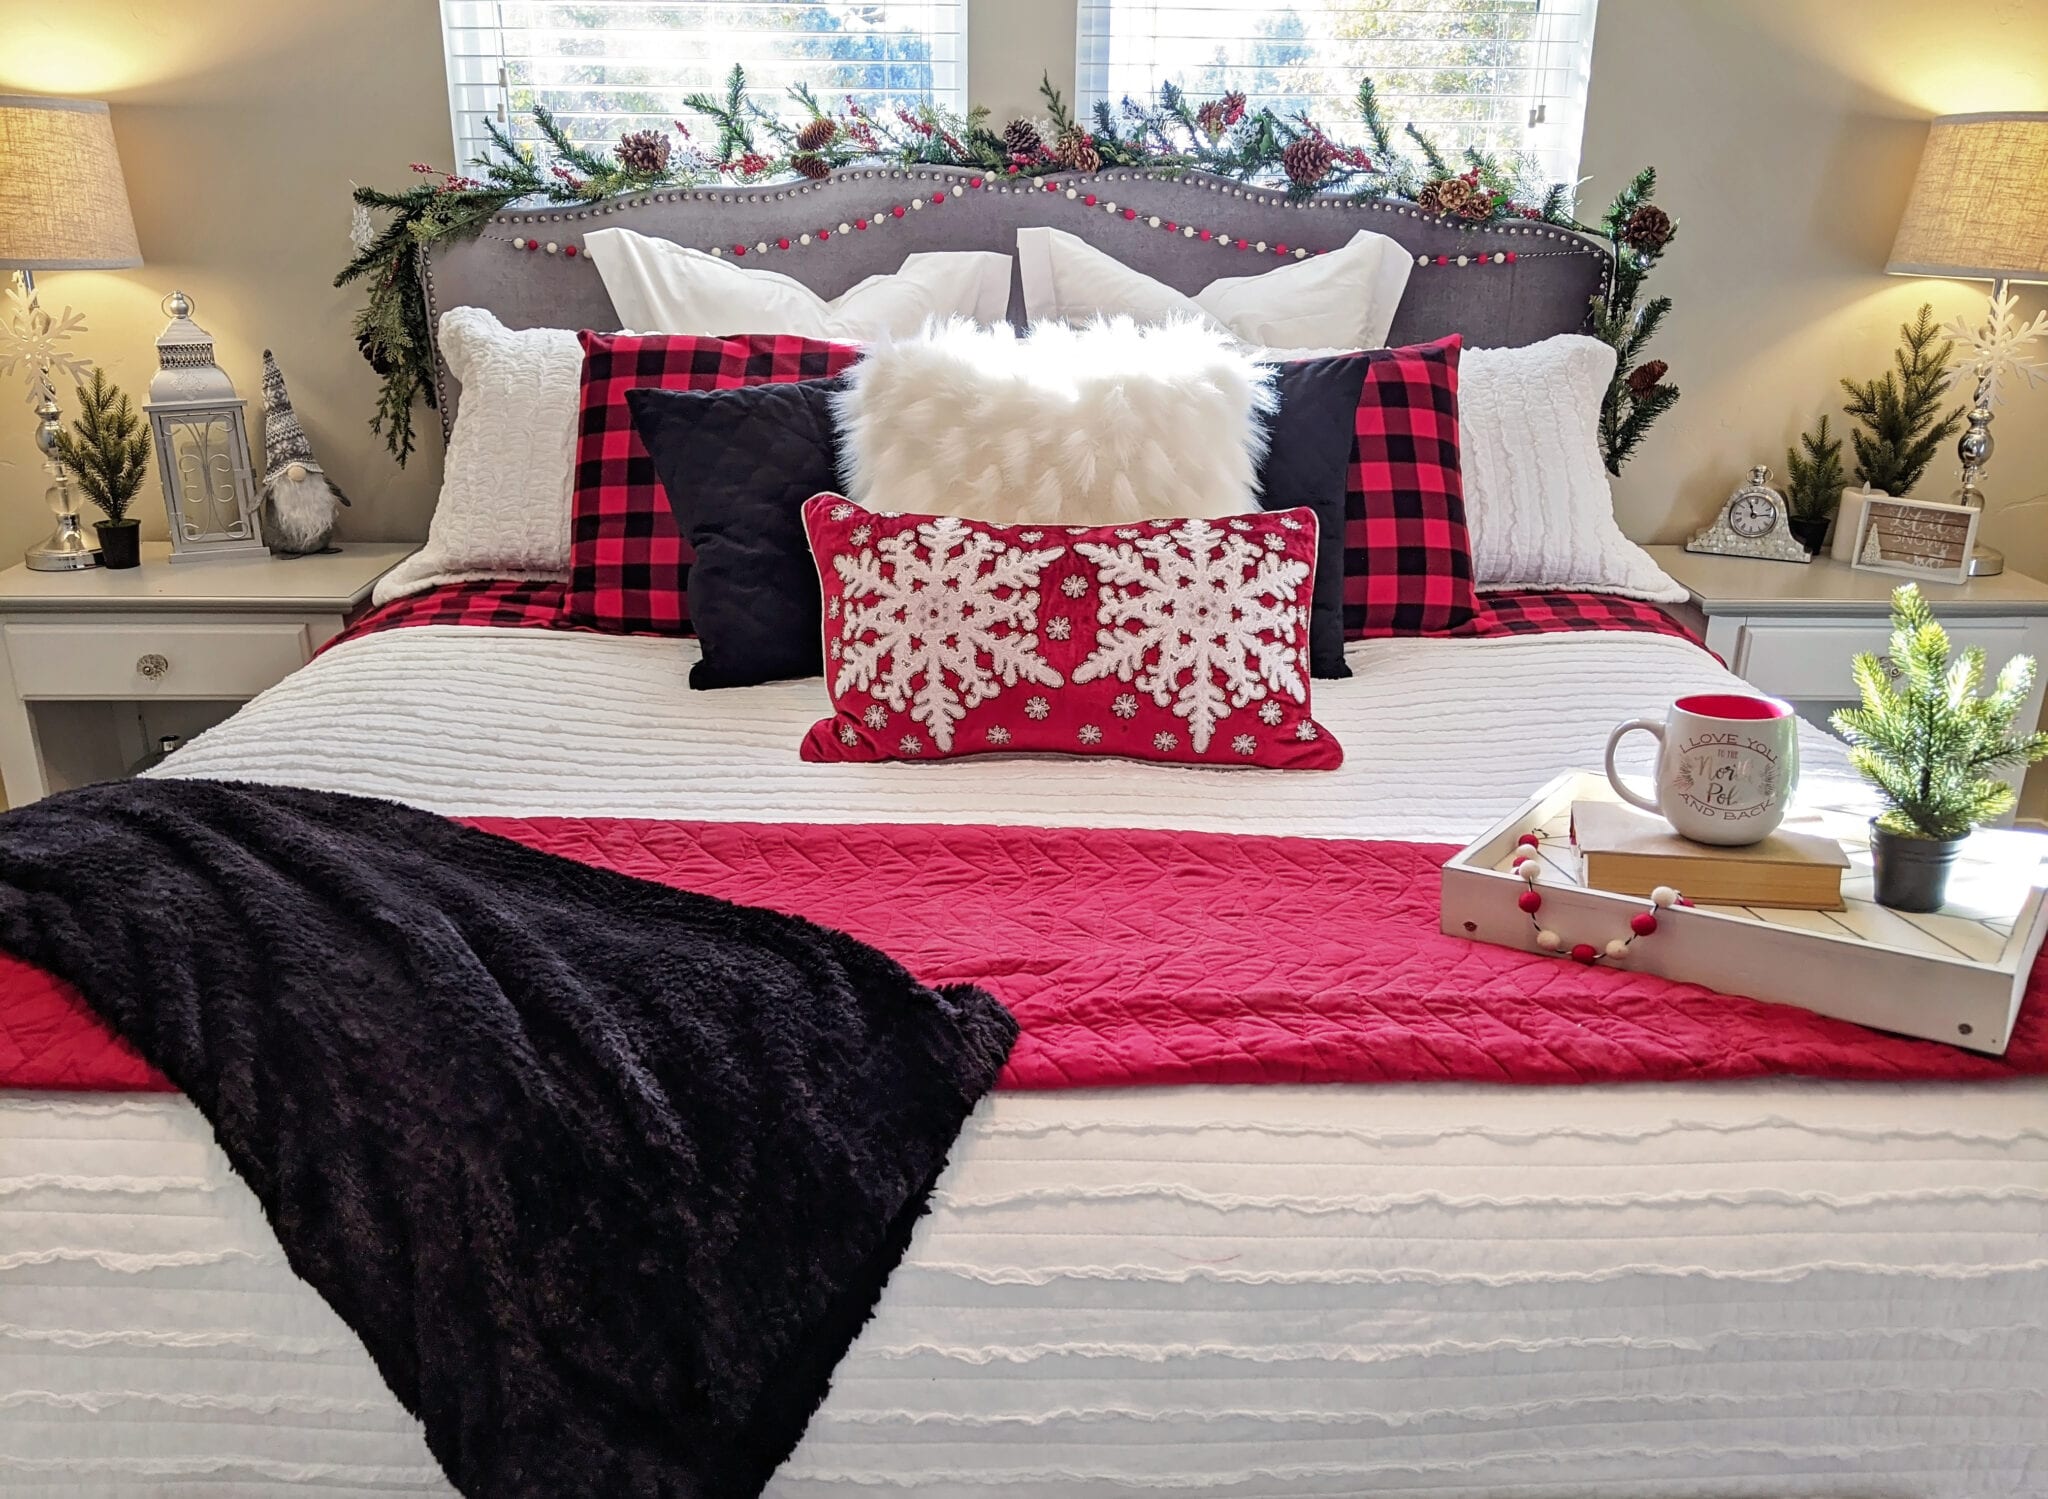 Ways To Decorate Bedroom Dresser For Christmas